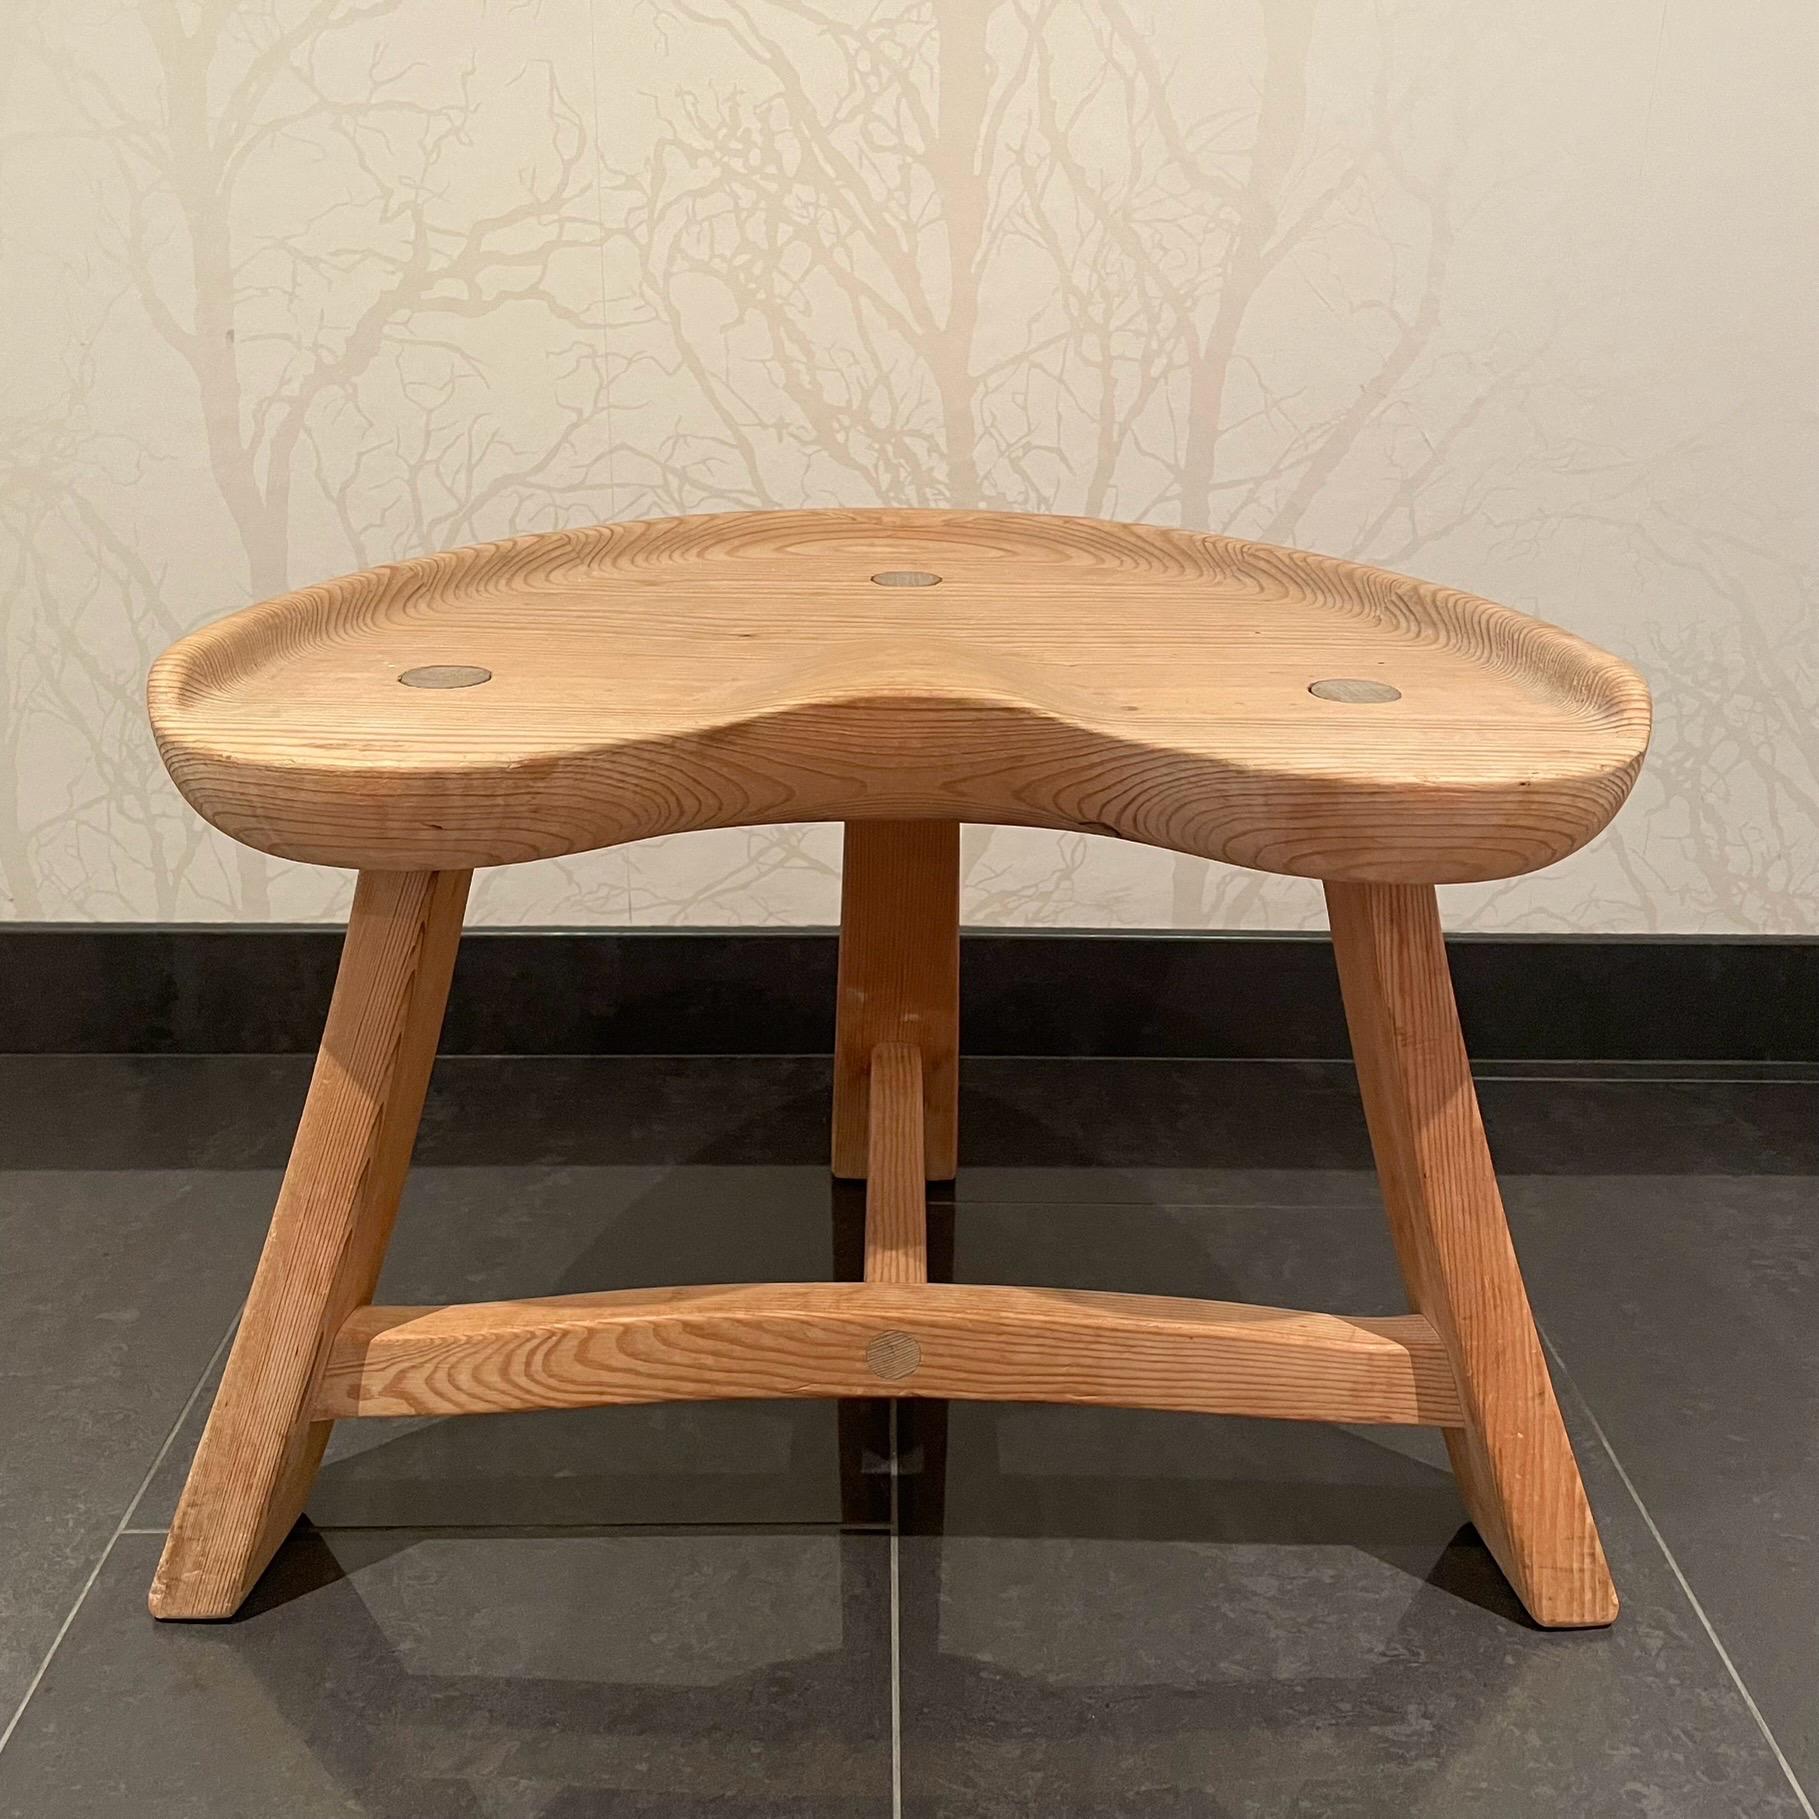 This is the Norwegian solid pine stool model nr 522. It comes in a stable, three legged construction with patinated untreated surface. The stool is burn marked “Krogenæs Möbler” on the underside of the seat. 

Model nr 522 was manufactured in a